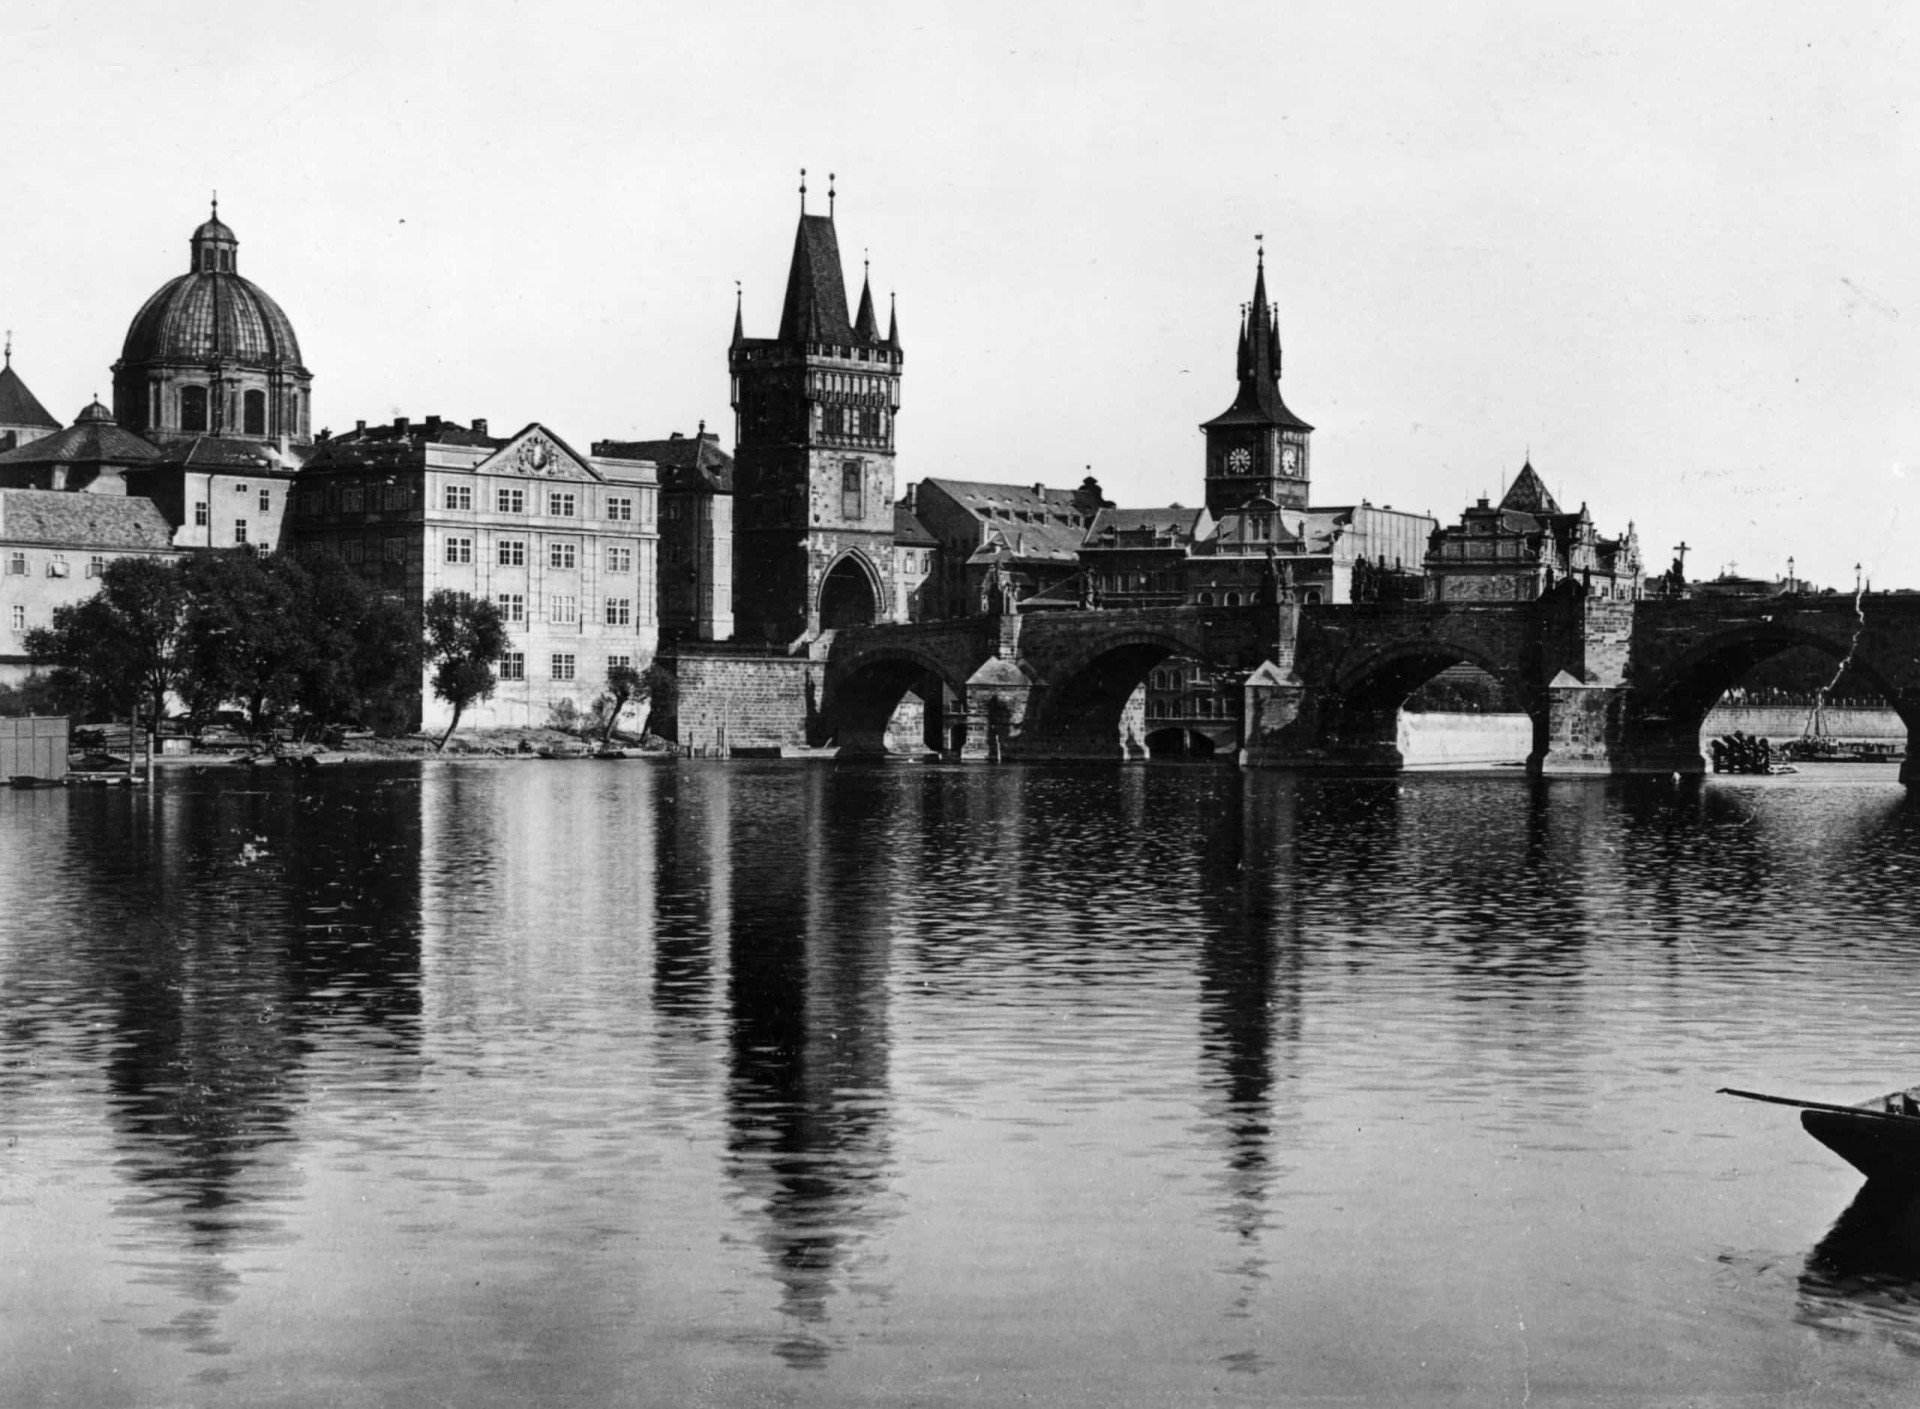 Prague Castle and the Charles Bridge reflect in the Vltava river. Photo taken in 1898.<p>You may also like:<a href="https://www.starsinsider.com/n/486617?utm_source=msn.com&utm_medium=display&utm_campaign=referral_description&utm_content=397441v1en-us"> The psychology behind why people hate certain celebrities</a></p>